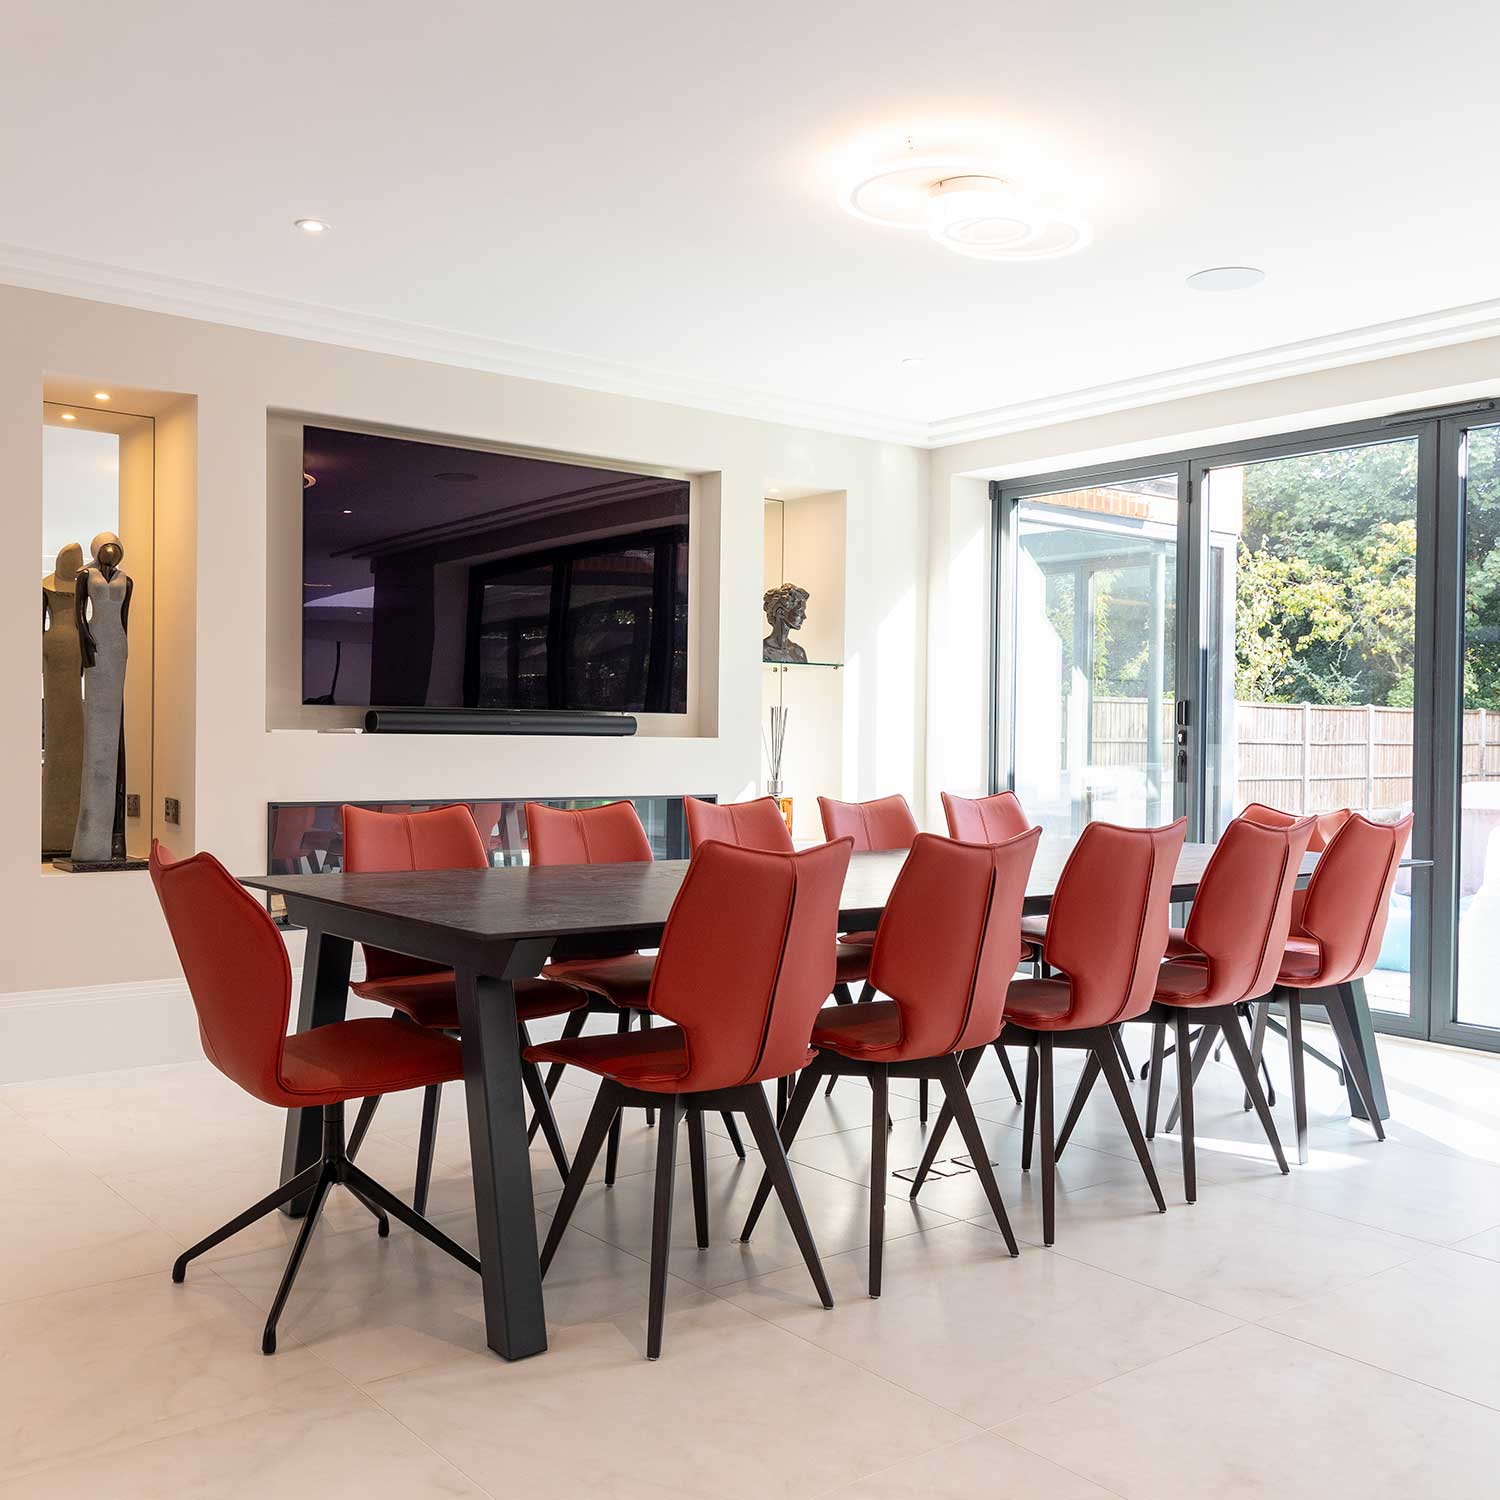 Bespoke 12 seat Dekton dining table by New England Home Interiors